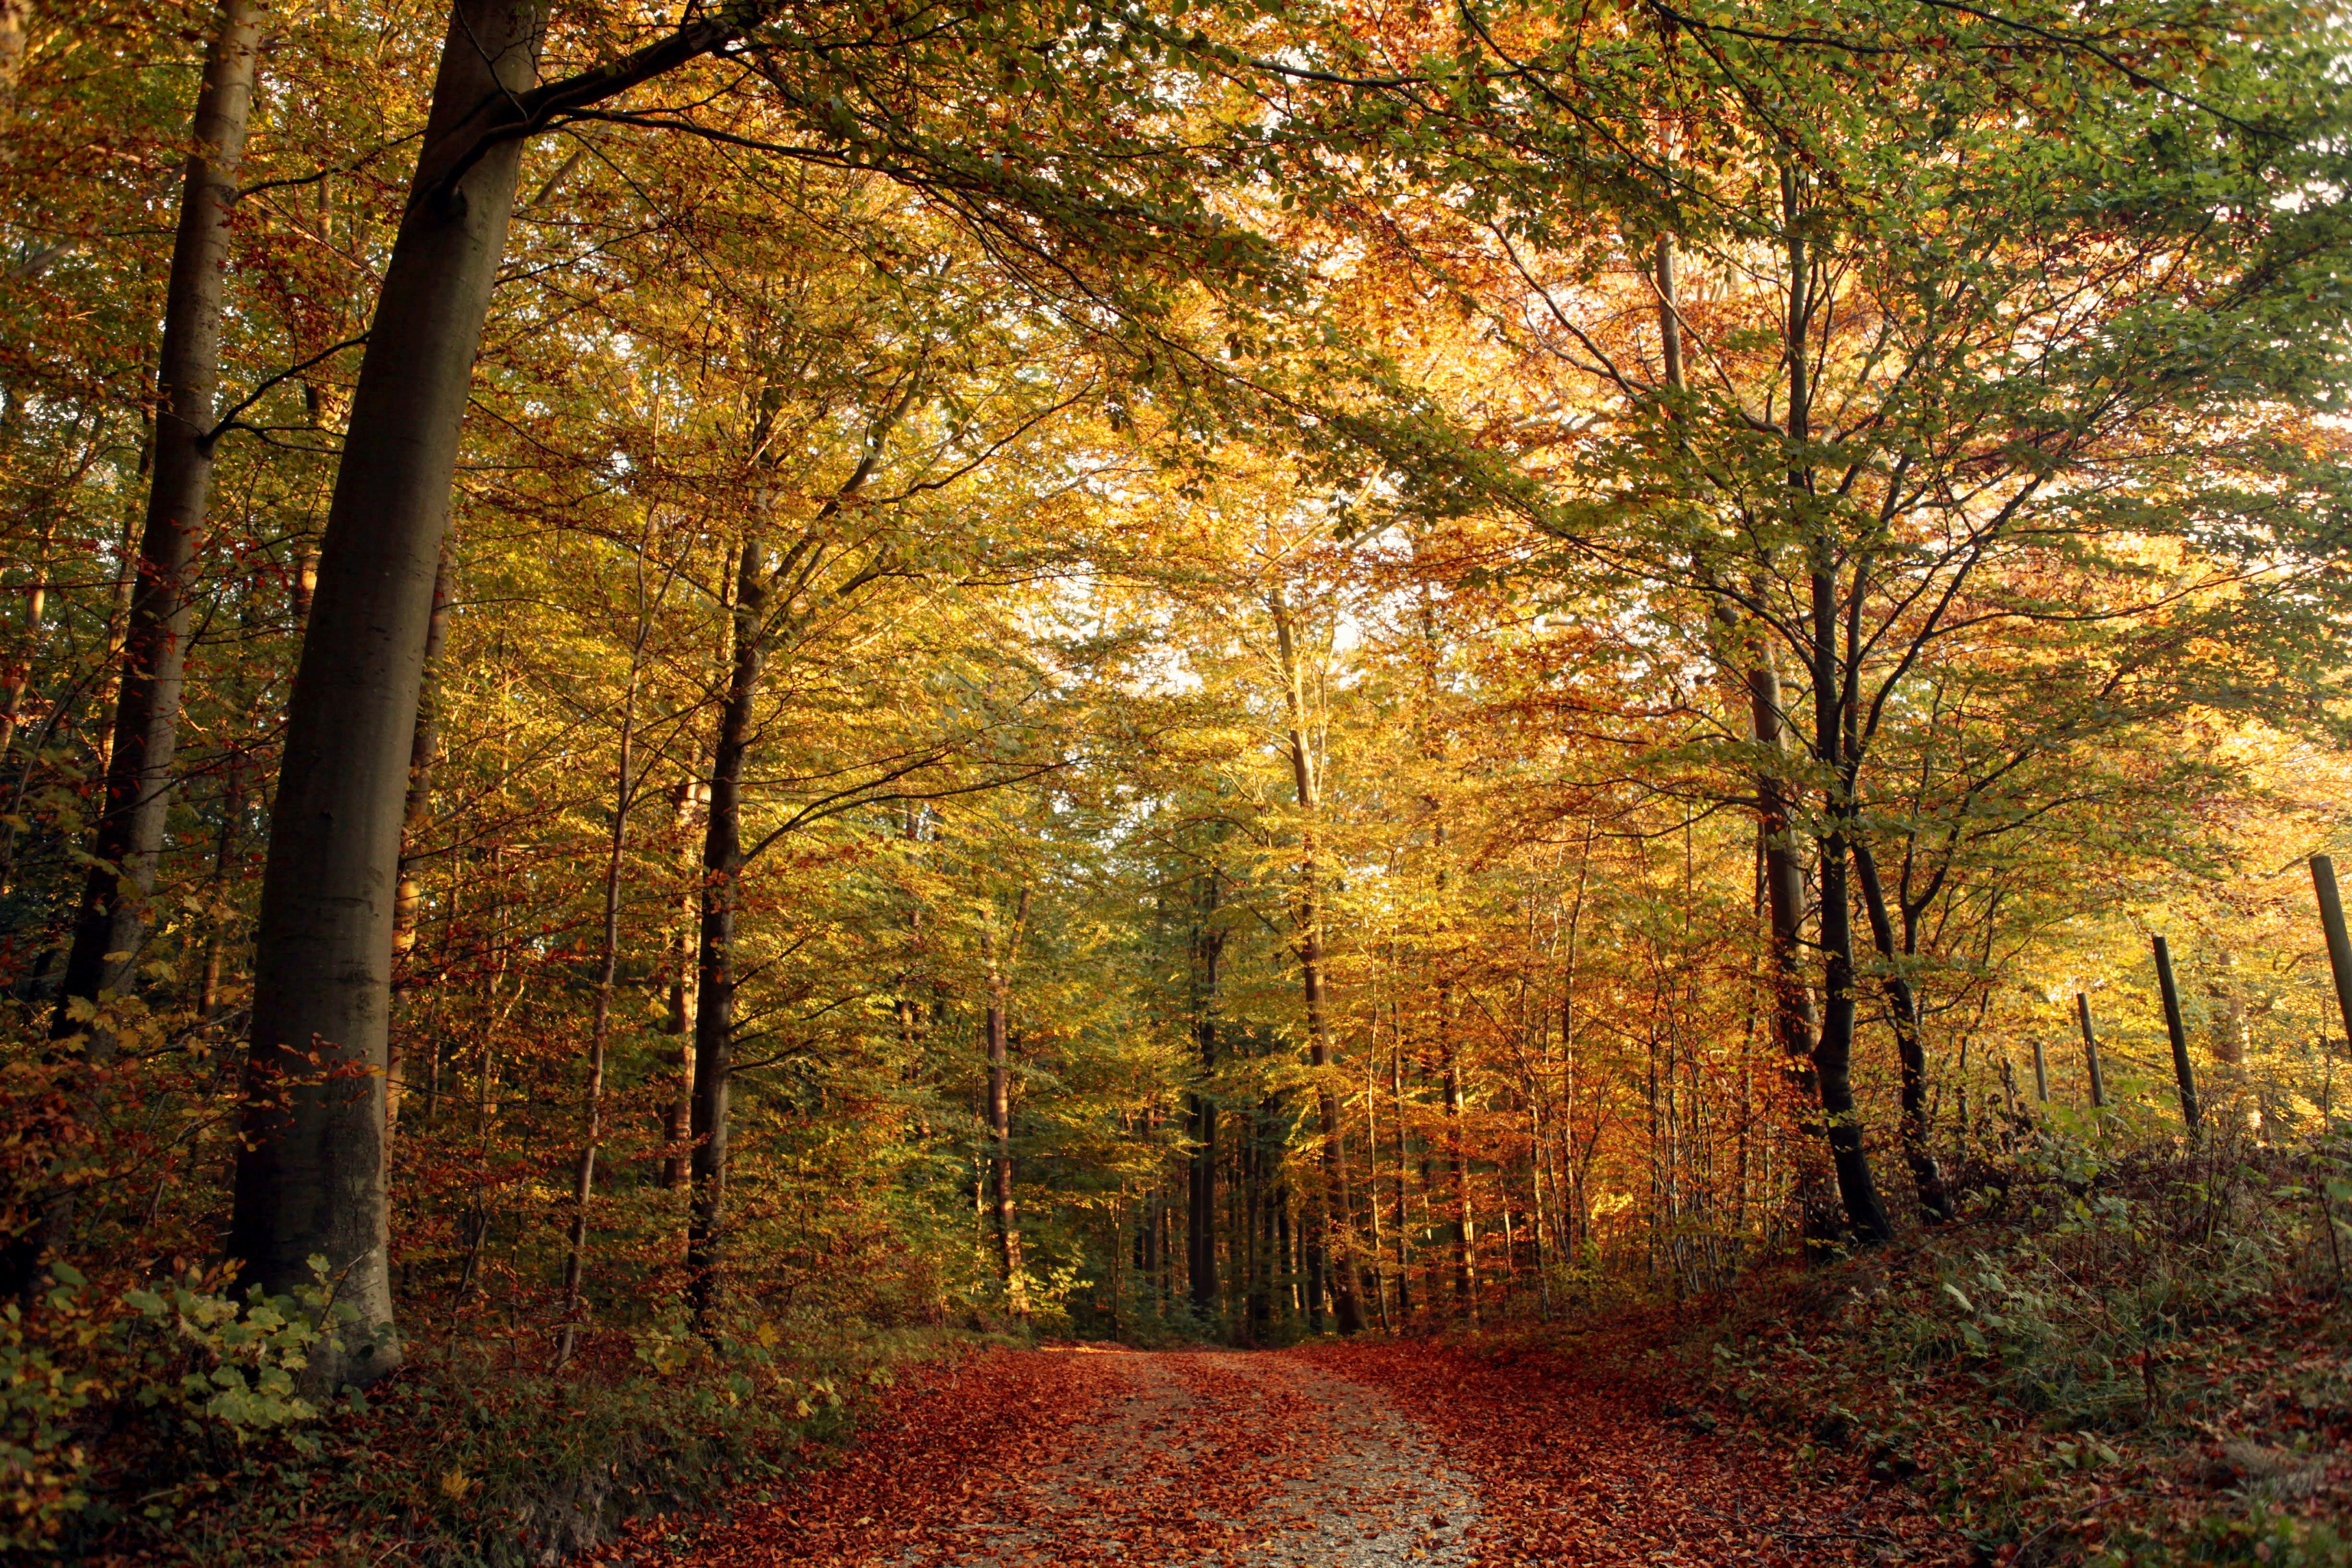 Image of an autumn forest by Louise Pilgaard